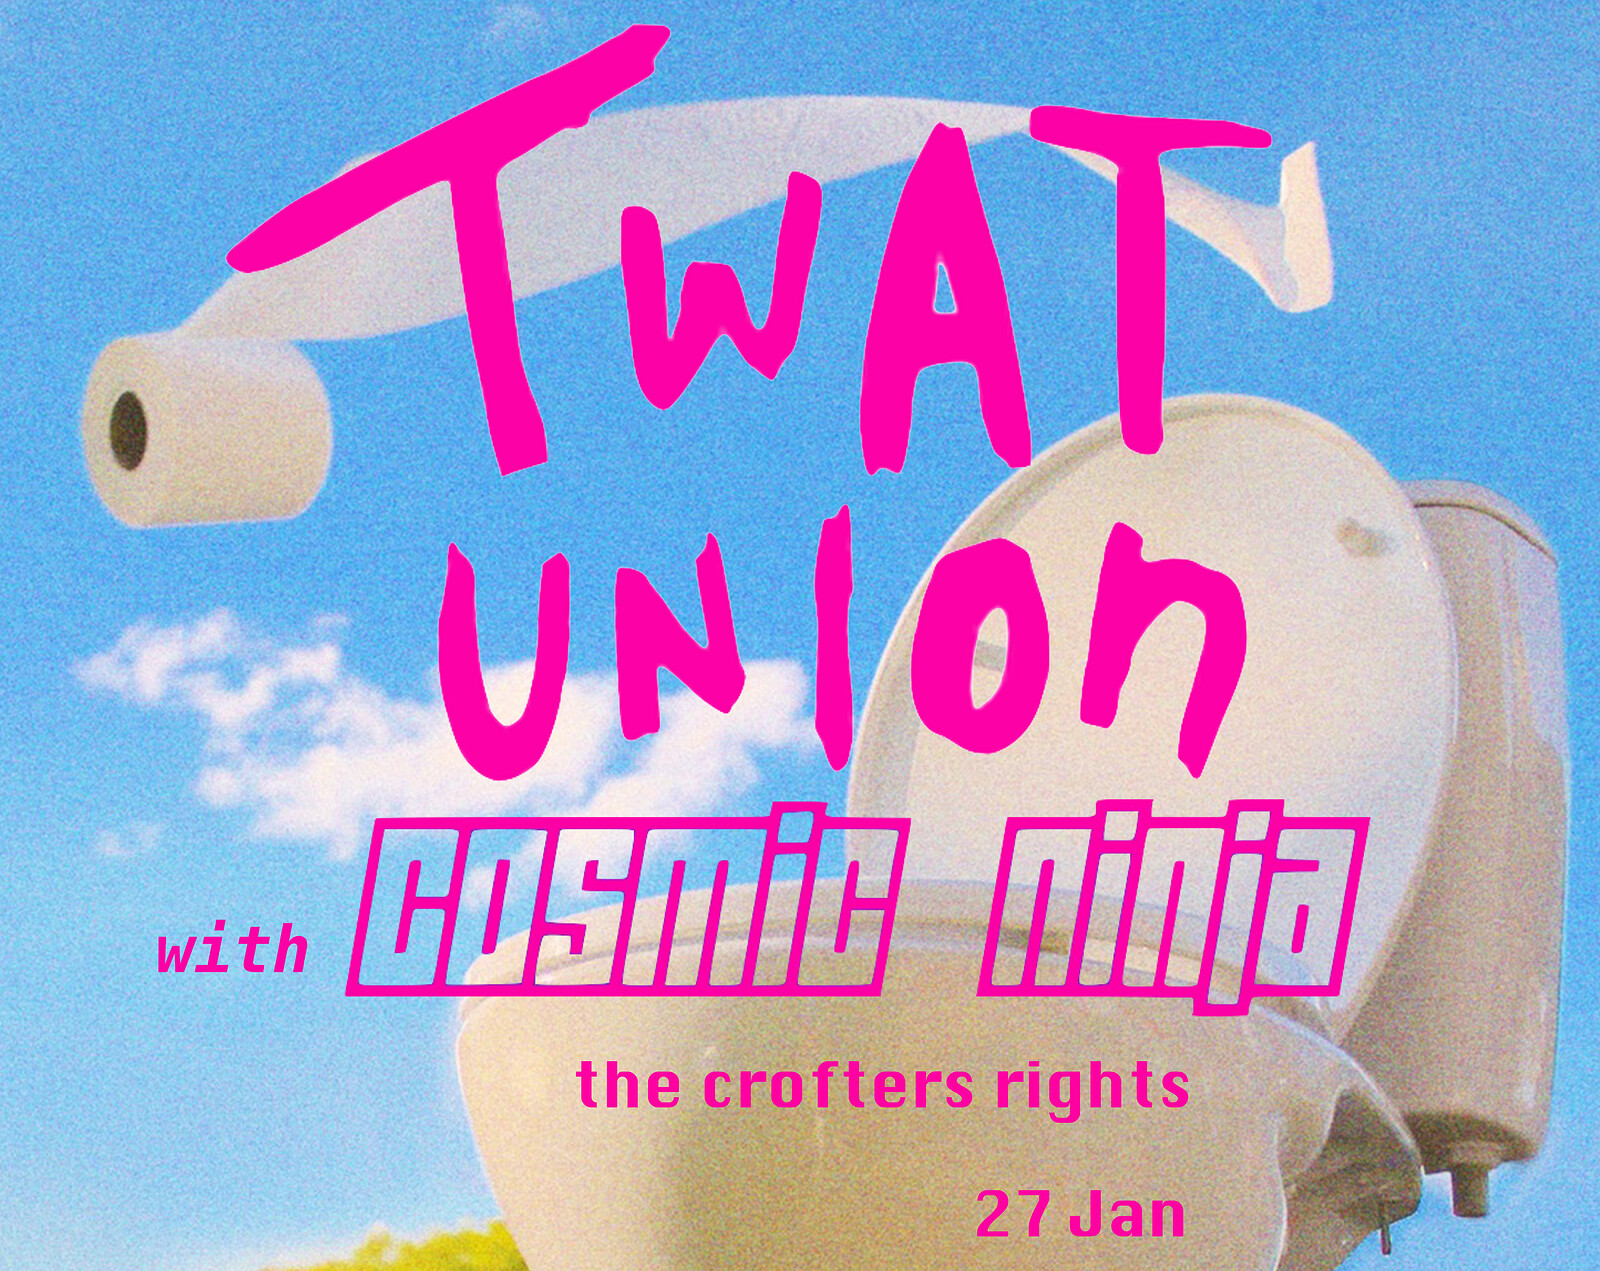 Twat Union + Cosmic Ninja - debut single party at Crofters Rights